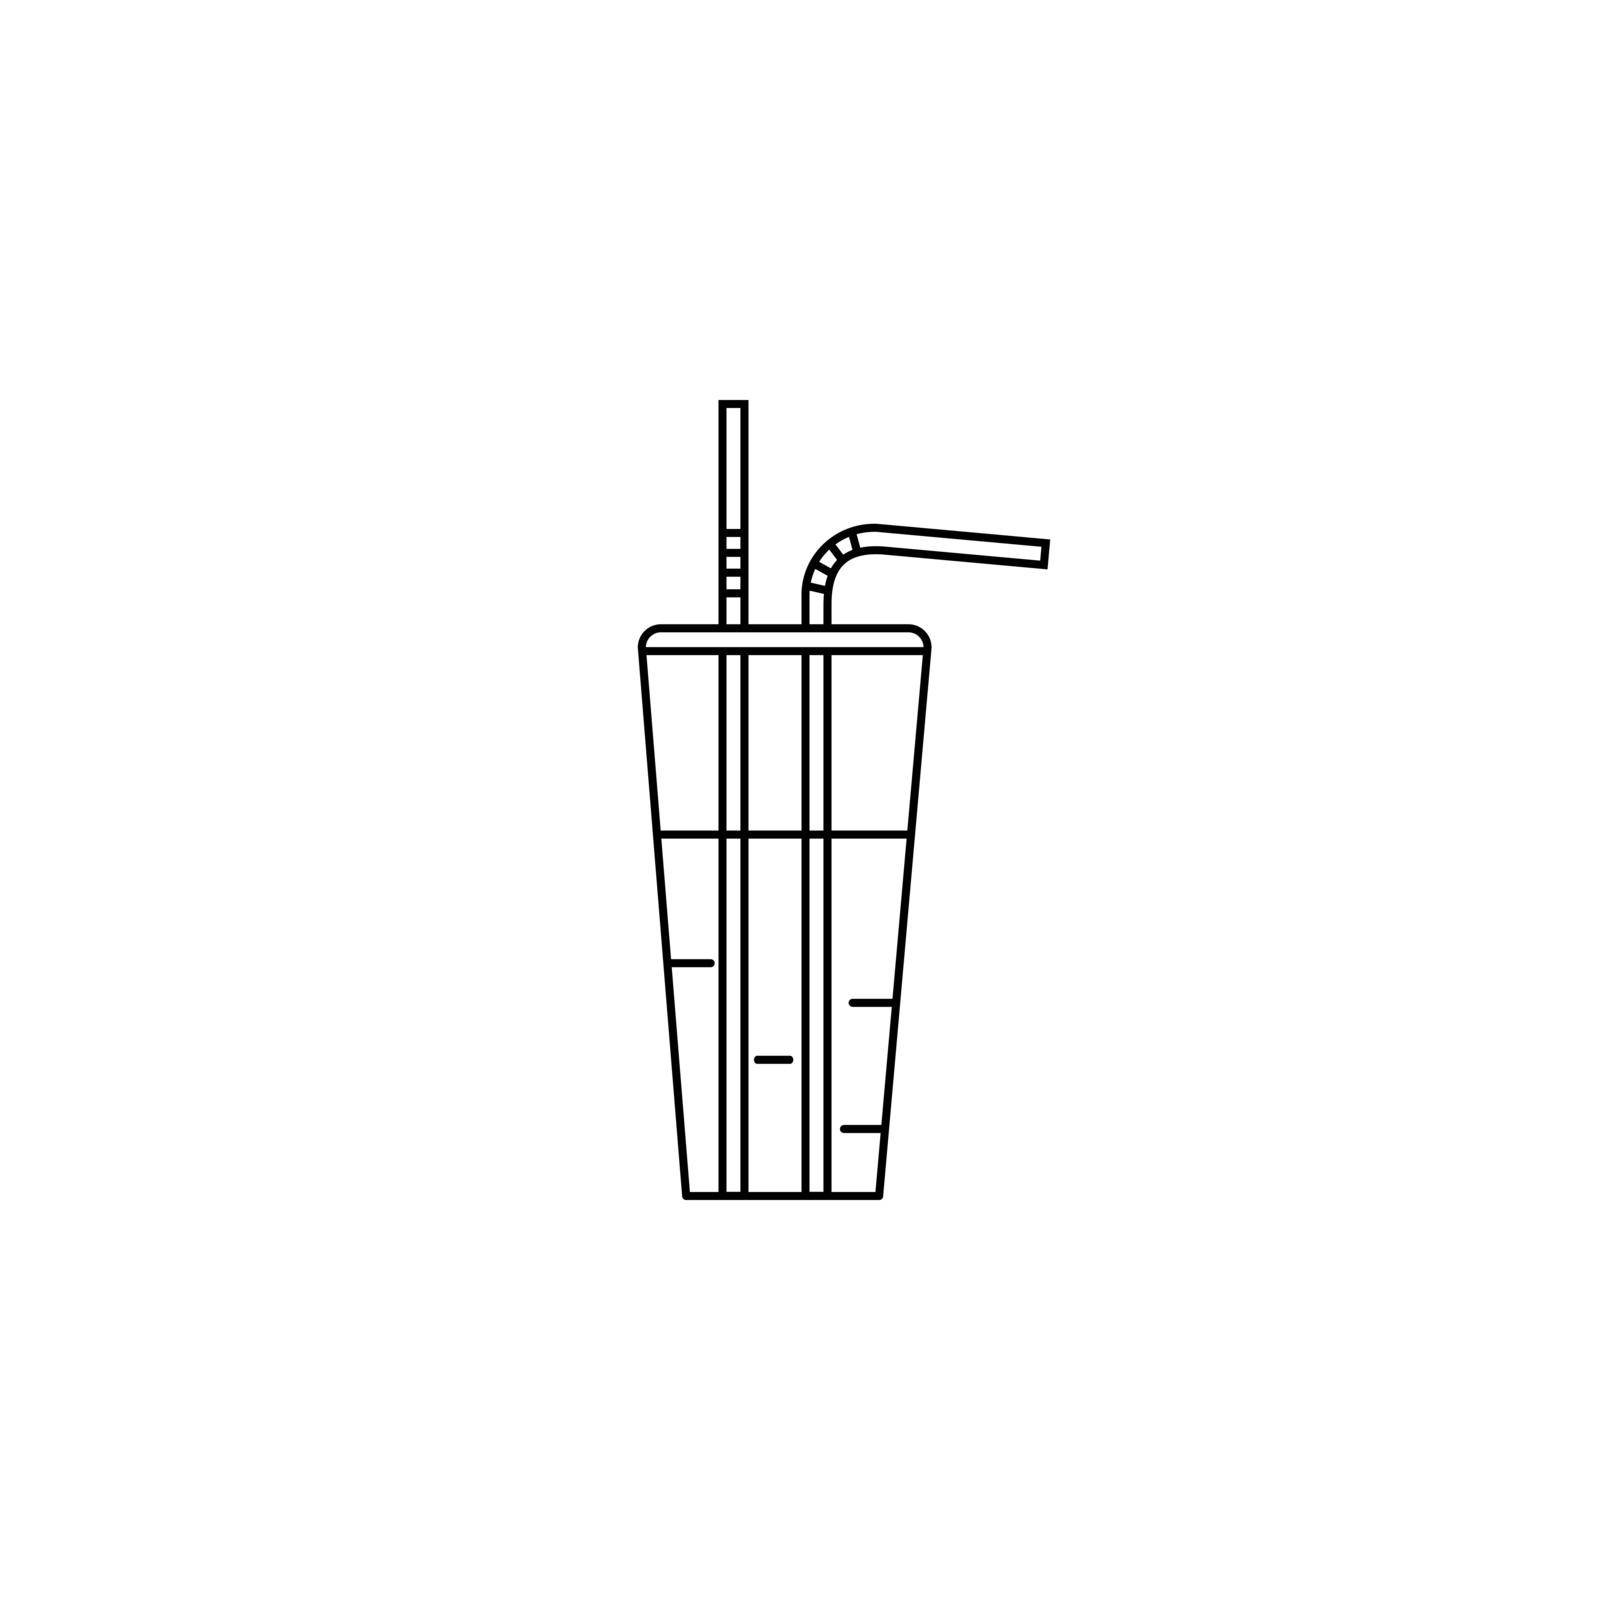 Cocktail with straws line icon vector illustration. Simple contour black silhouette of glass with alcohol drink. Beverage logo. Brew isolated drawn web element